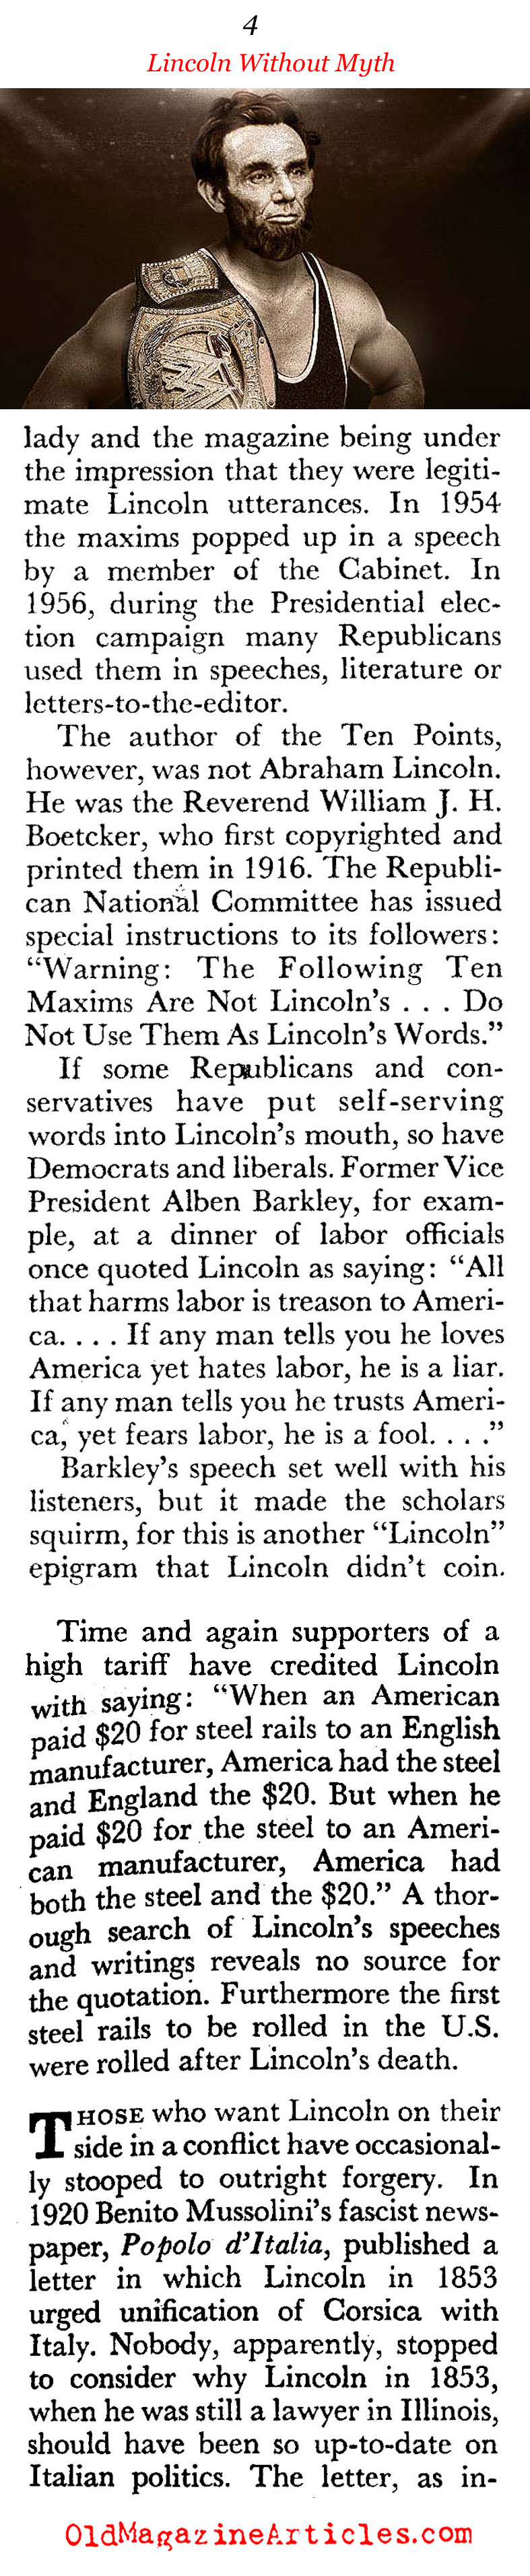 Lincoln Without the Myths (Coronet Magazine, 1961)